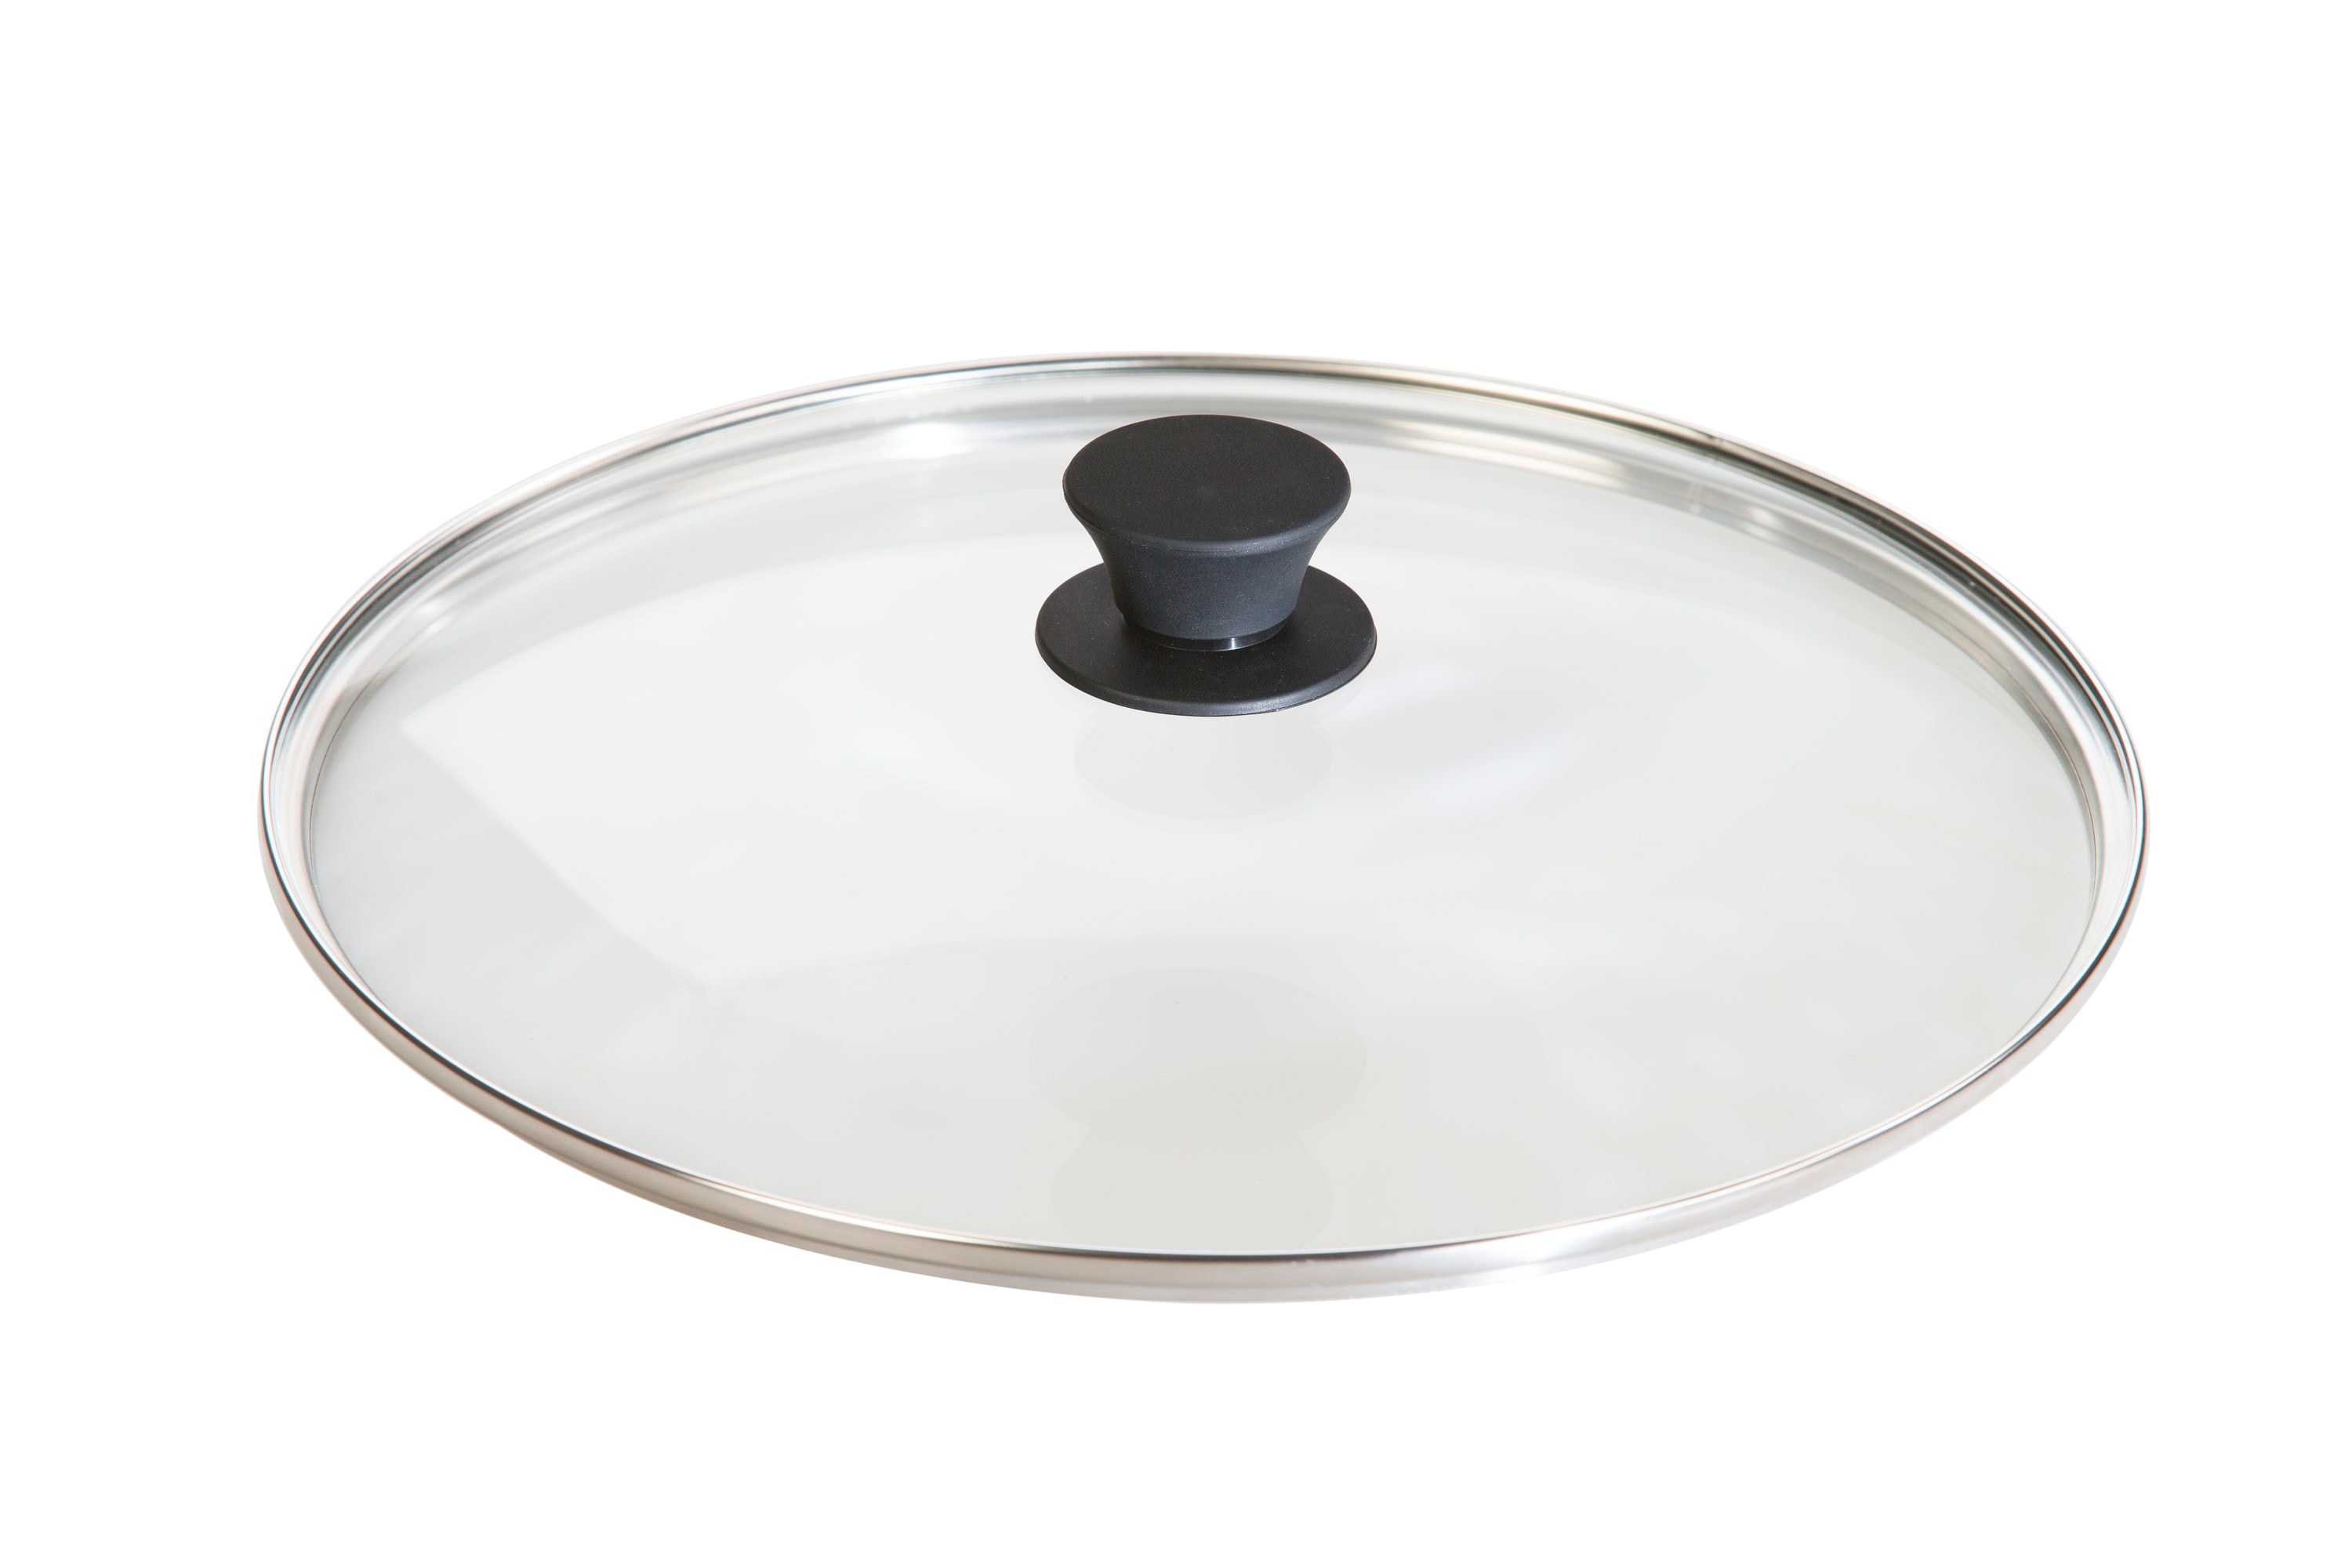 Lodge Cast Iron 12 Inch Glass Lid for 12-in Skillet, Clear Tempered Glass, Dishwasher & Oven Safe